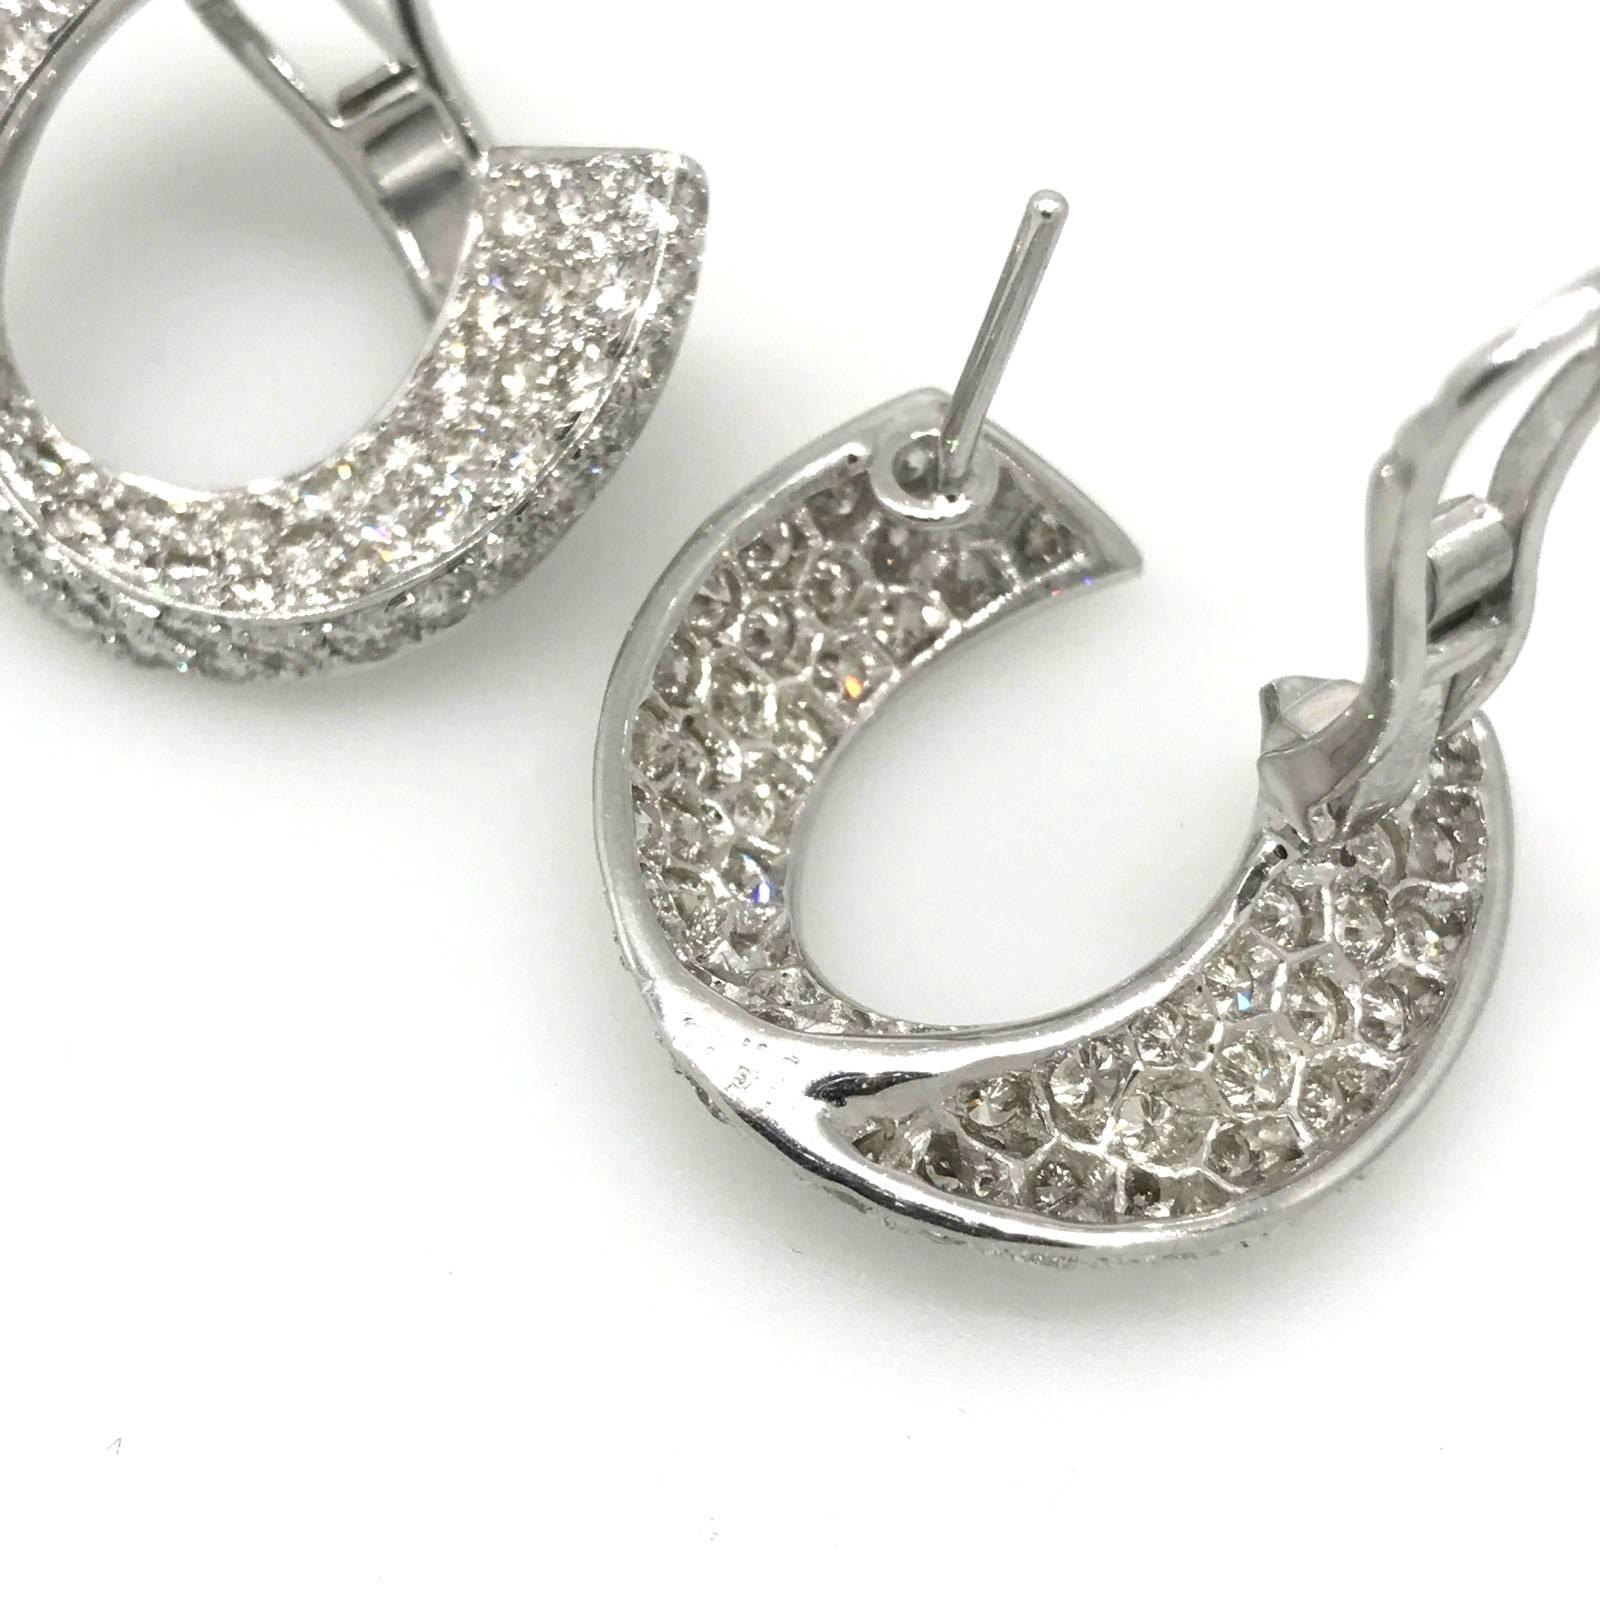 Crescent Shaped Pave Diamond Earrings 5.50 Carat in 18 Karat White Gold In Excellent Condition For Sale In La Jolla, CA